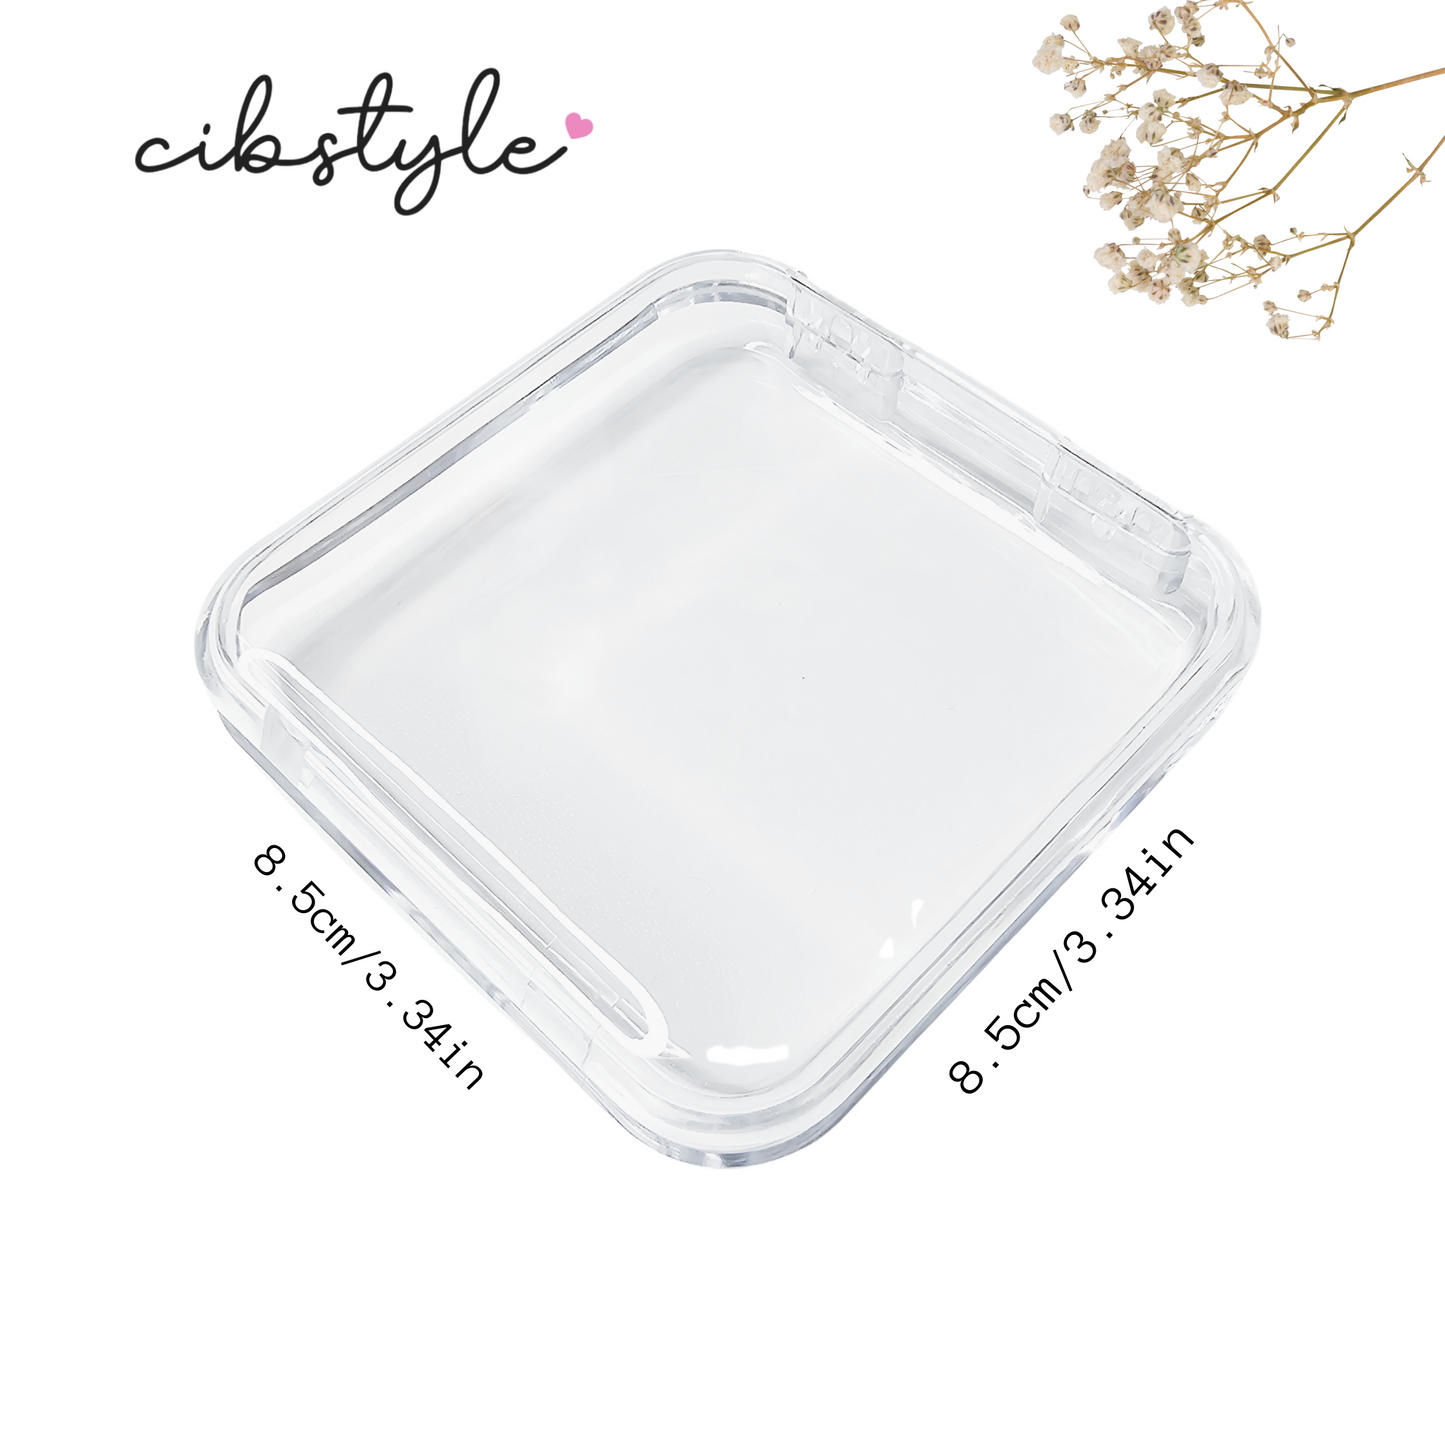 CIBSTYLE Clear Press On Nails Storage Boxes